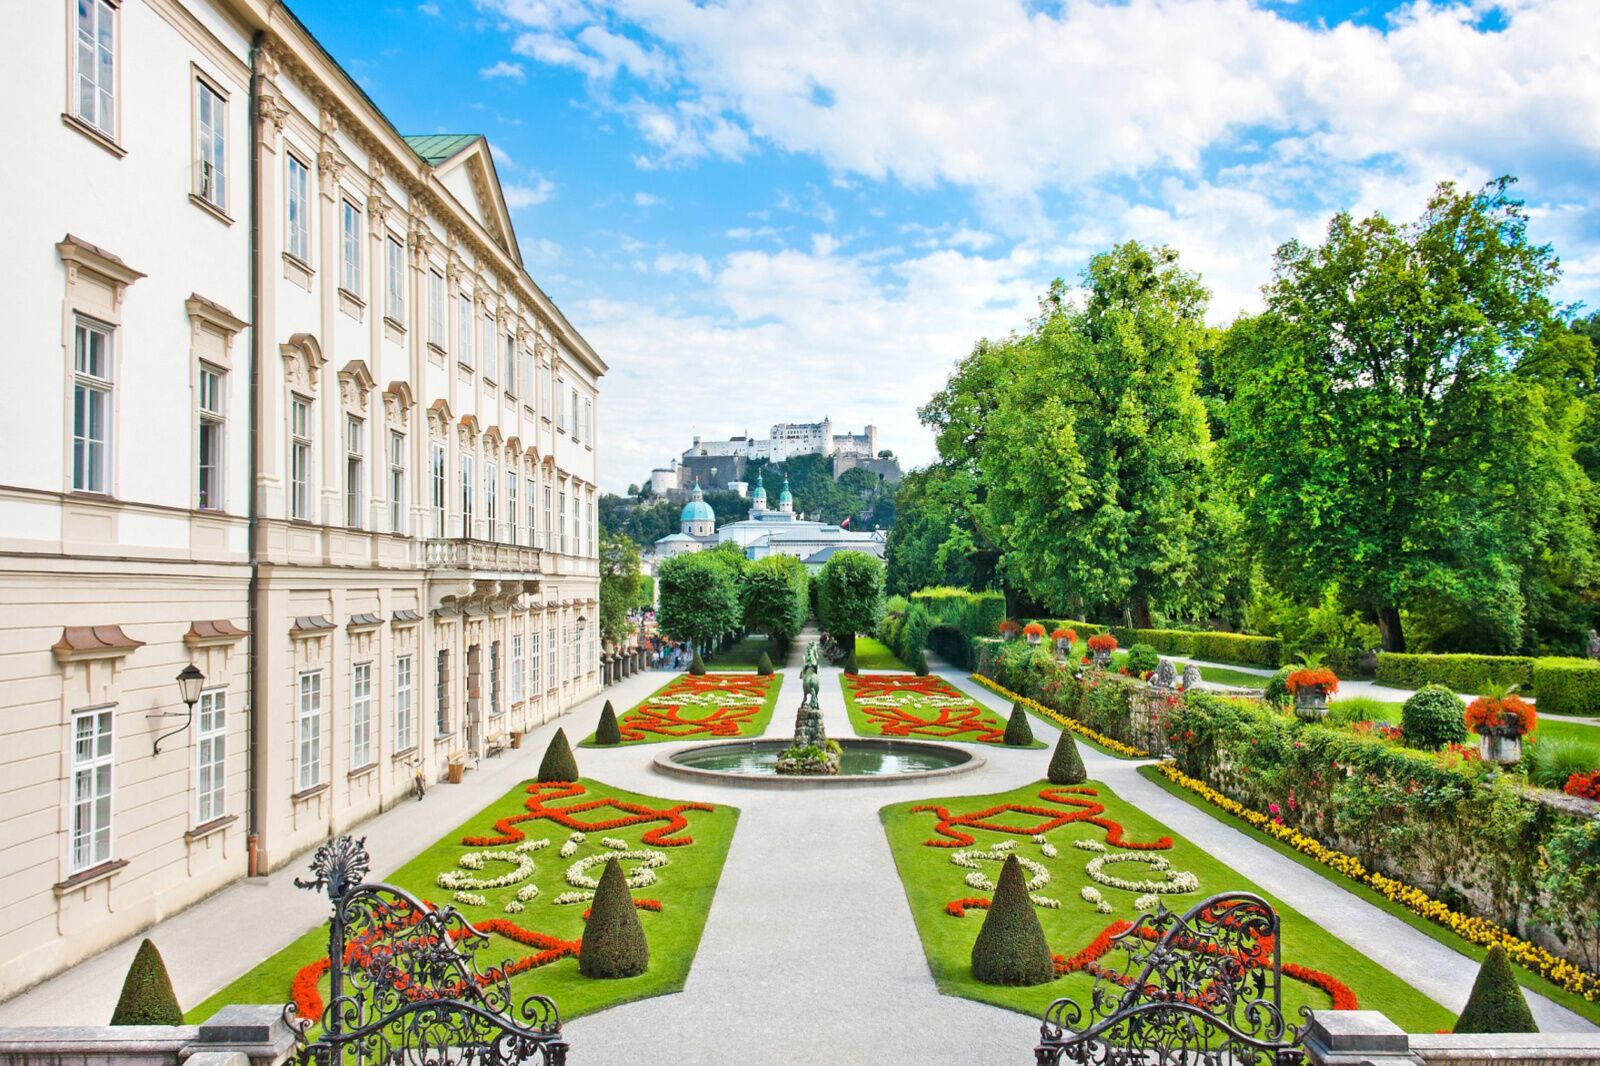 Mirabell gardens - free things to do in salzburg austria